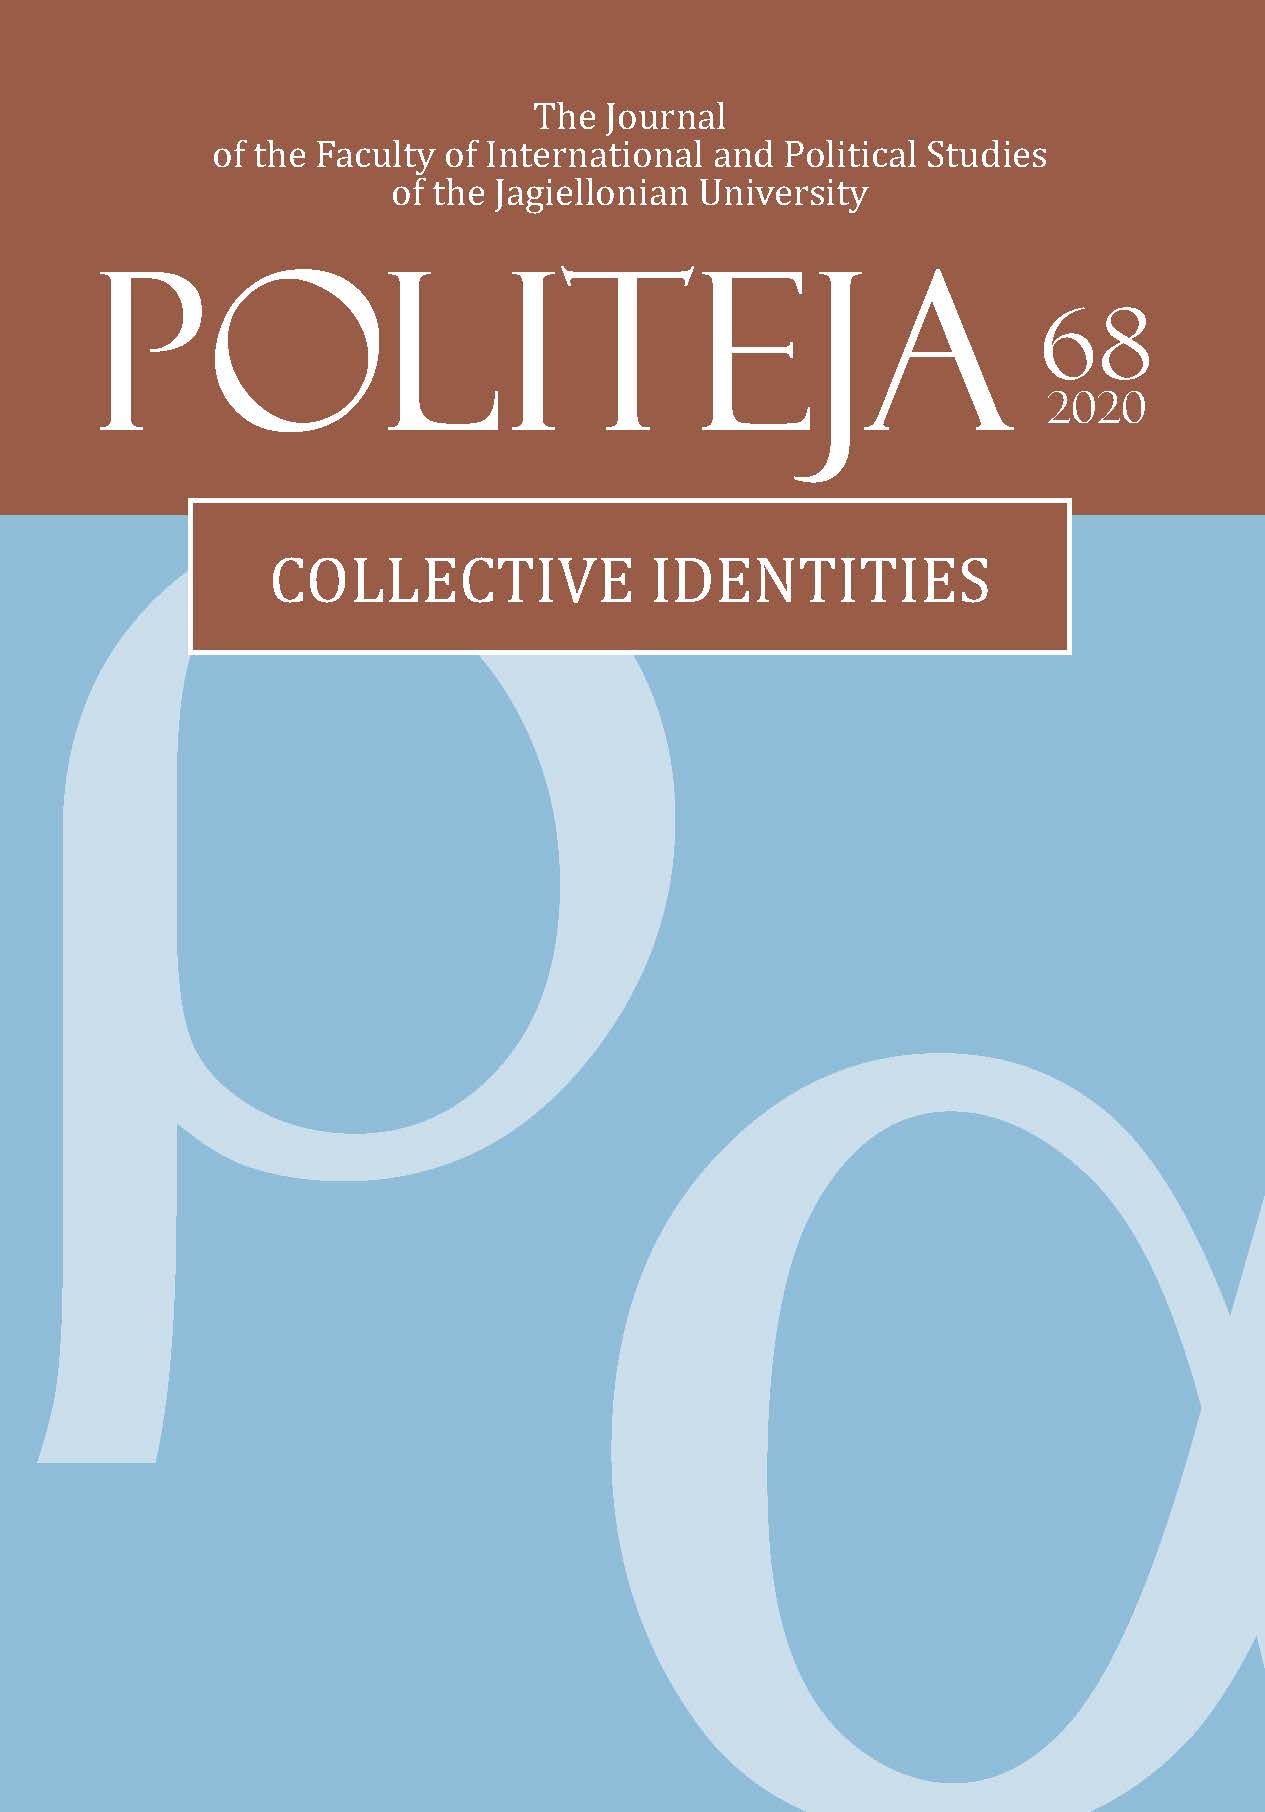 					View Vol. 17 No. 5(68) (2020): Collective Identities
				